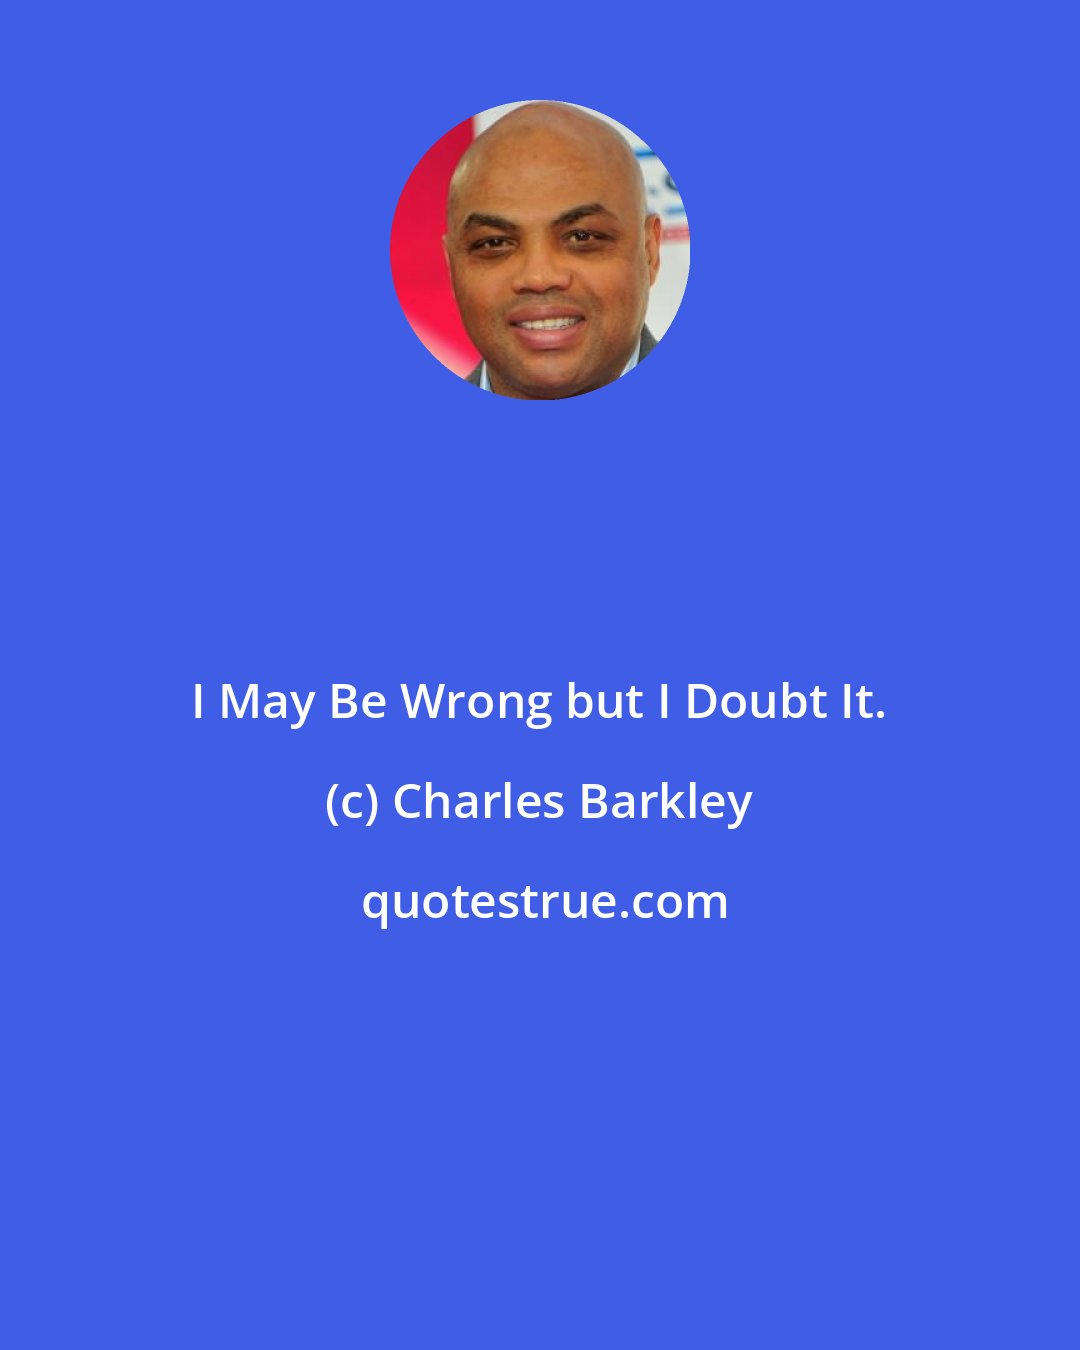 Charles Barkley: I May Be Wrong but I Doubt It.